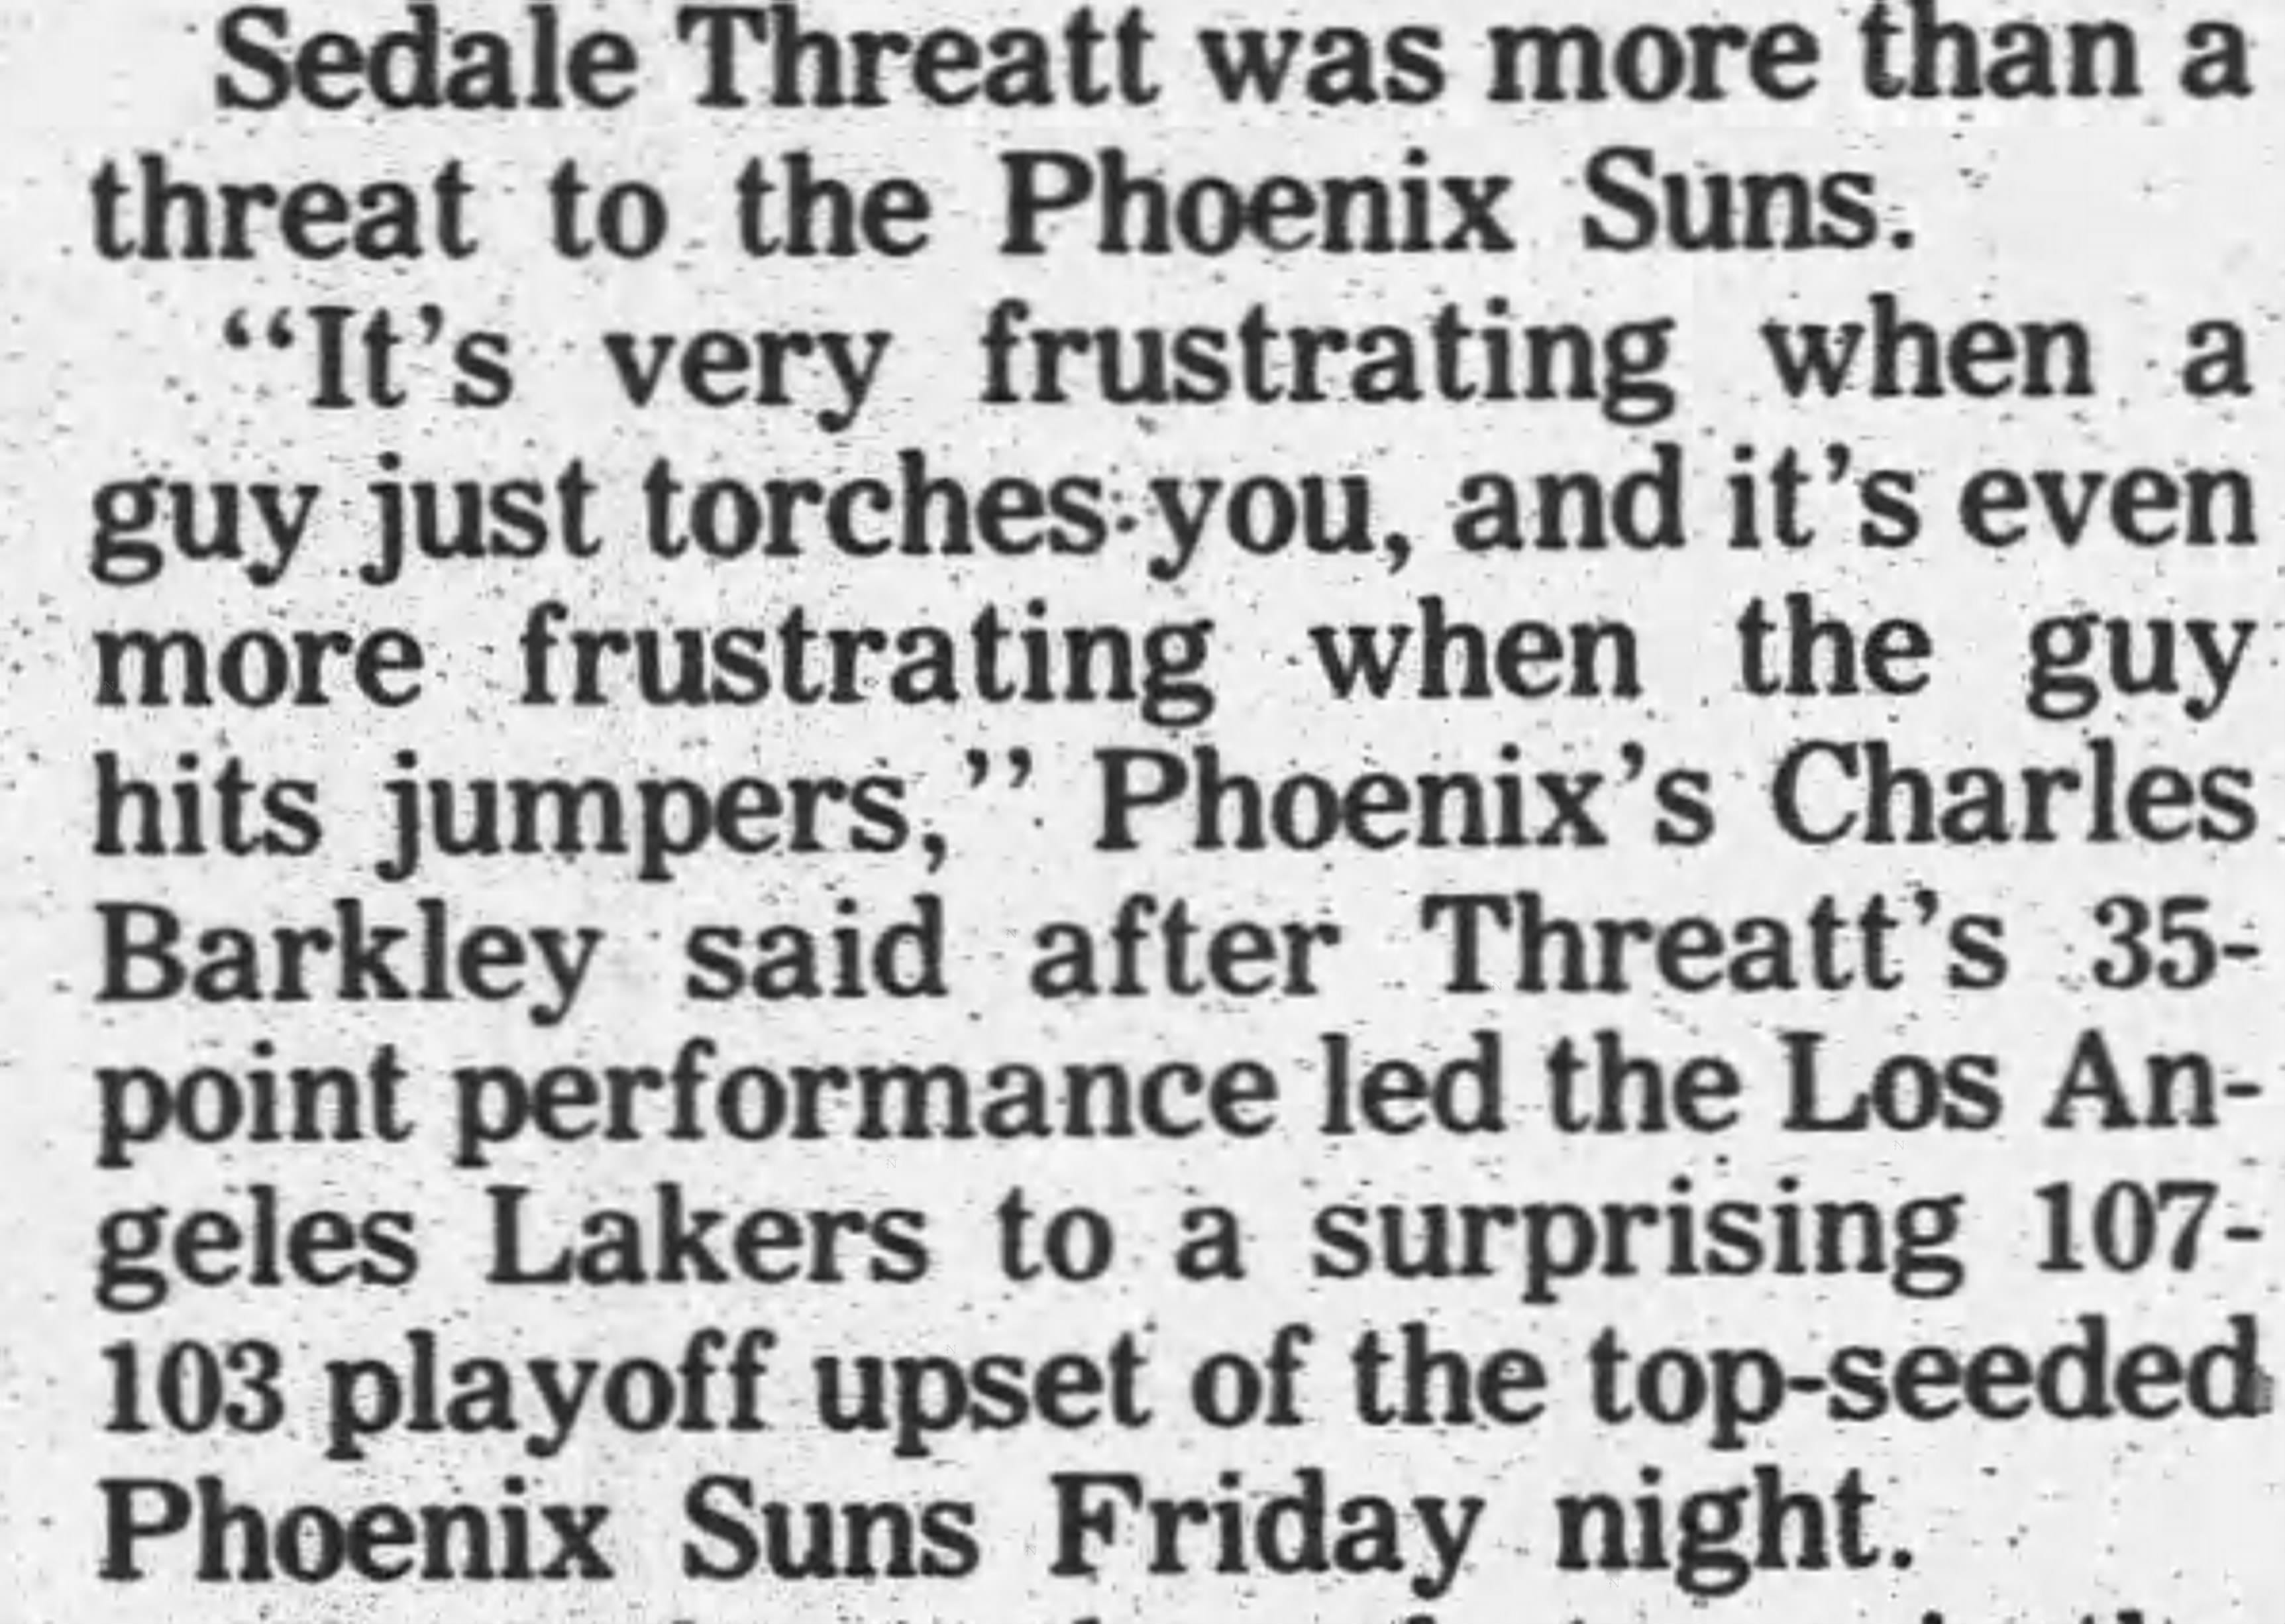 RJP: Phoenix Suns - by Curtis M. Harris - ProHoopsHistory